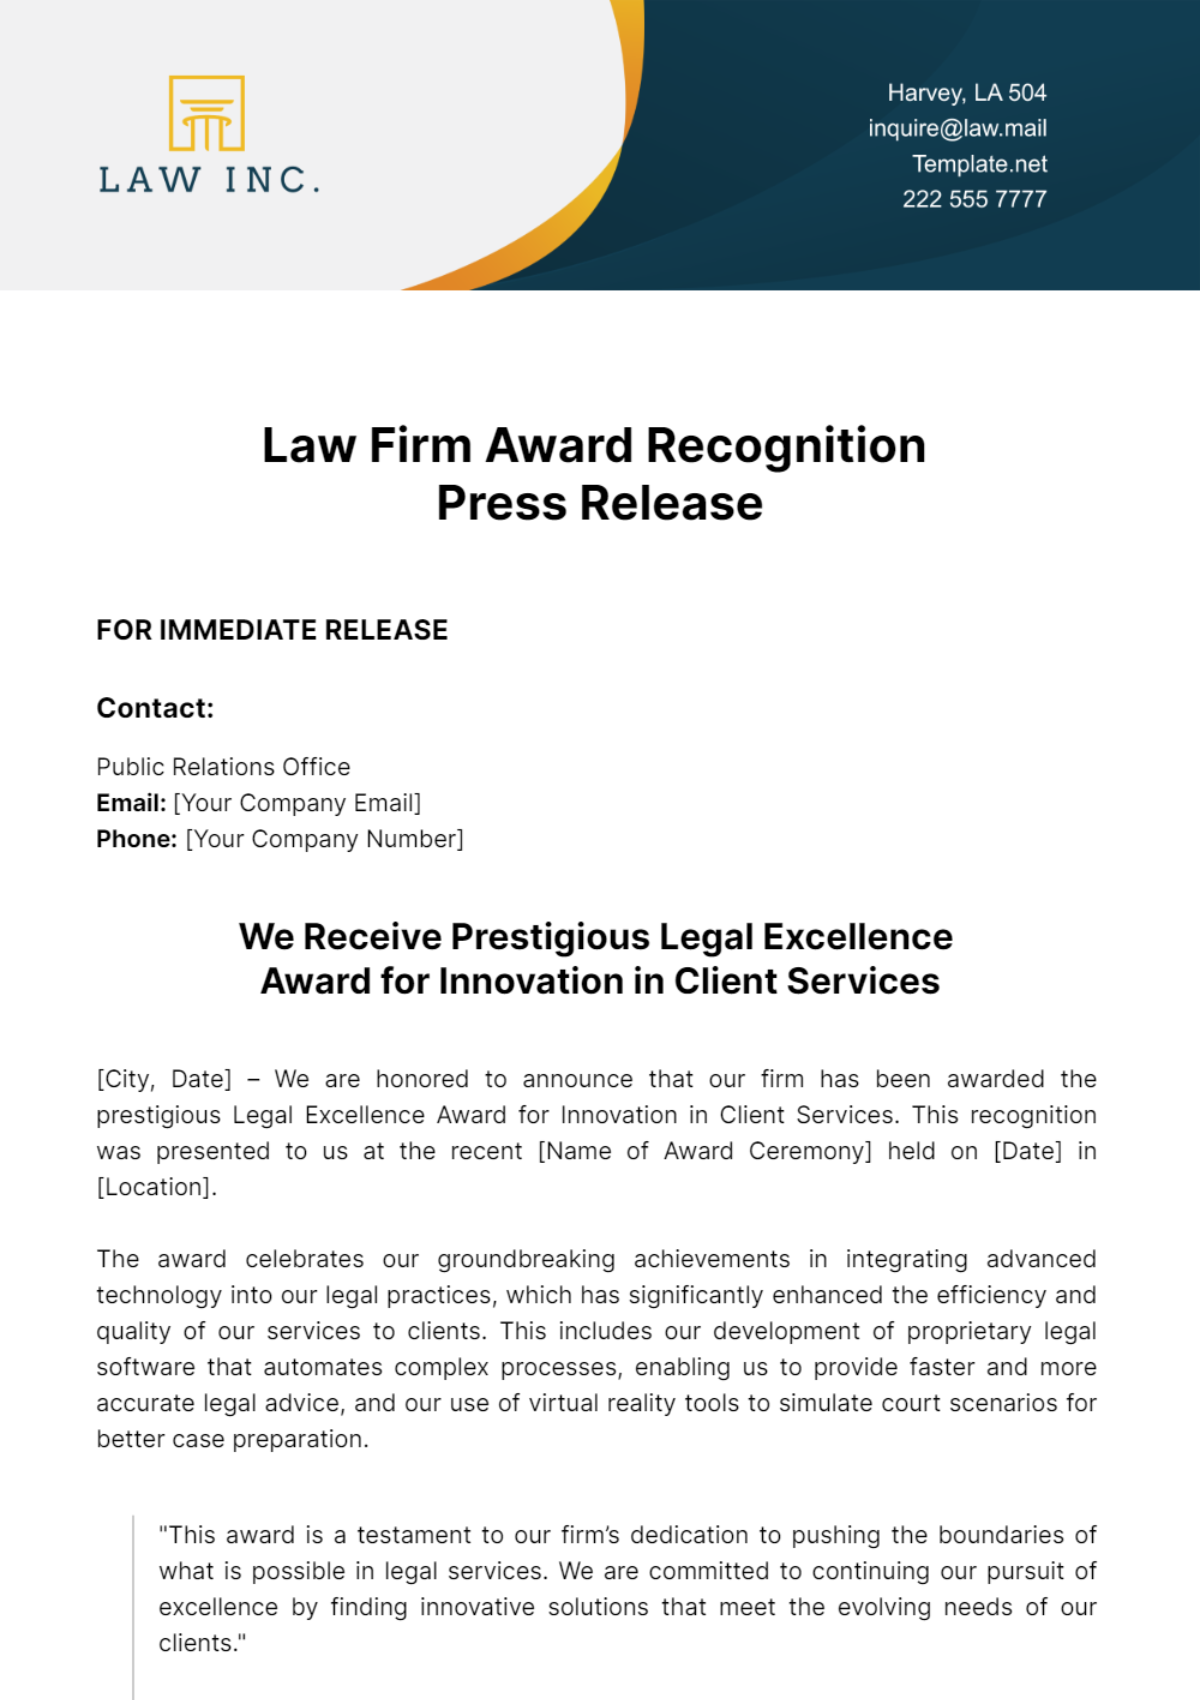 Law Firm Award Recognition Press Release Template